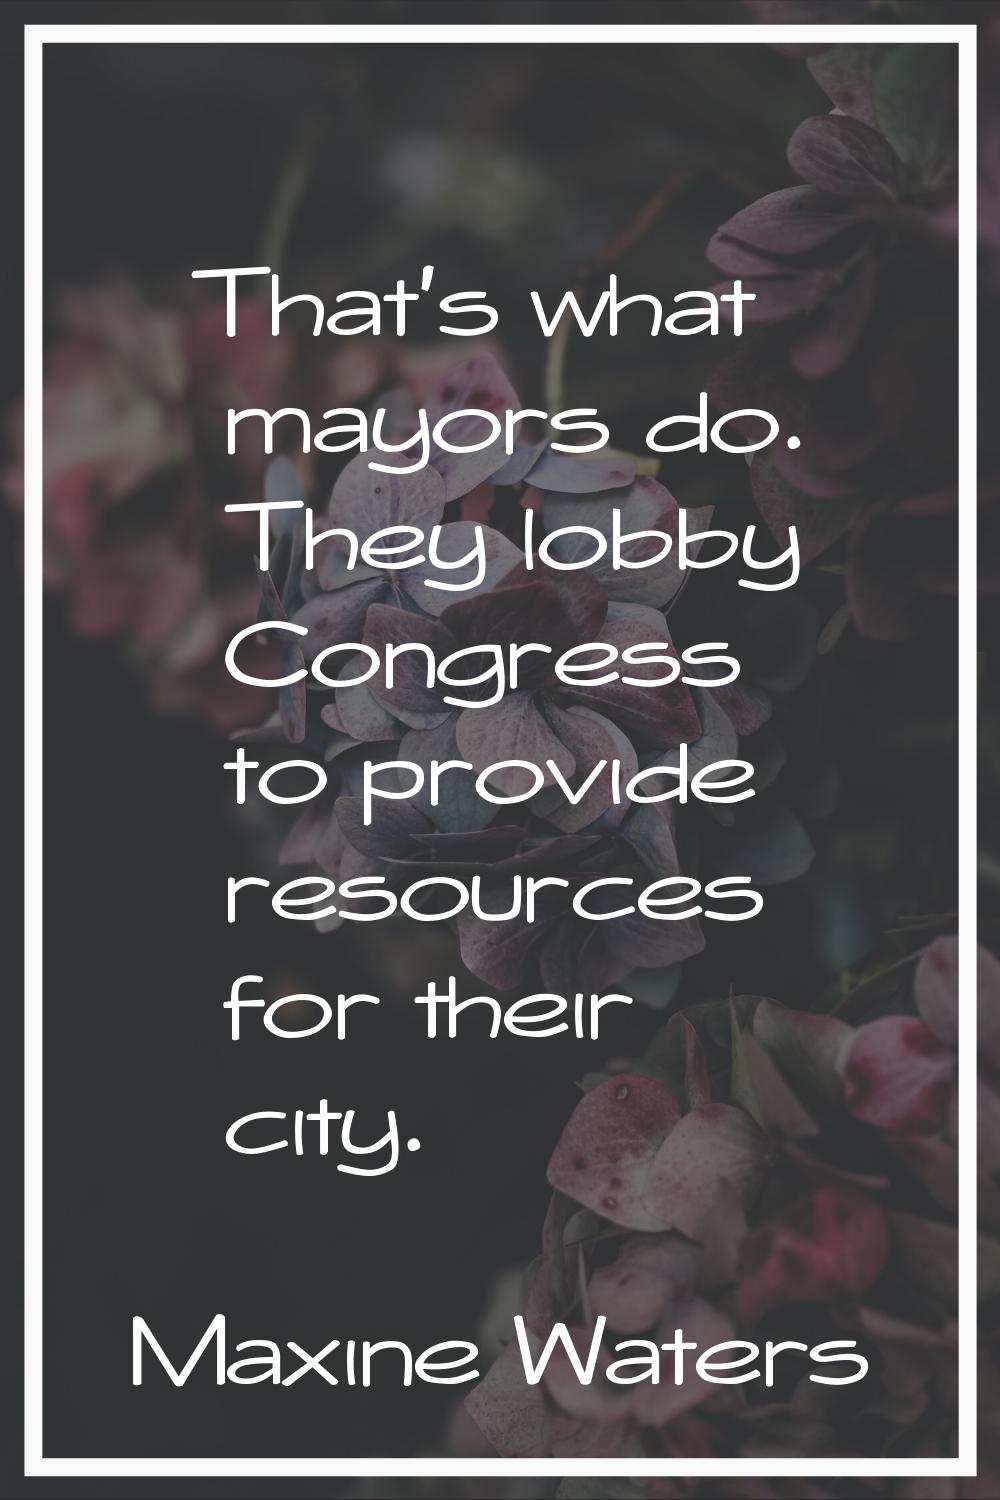 That's what mayors do. They lobby Congress to provide resources for their city.